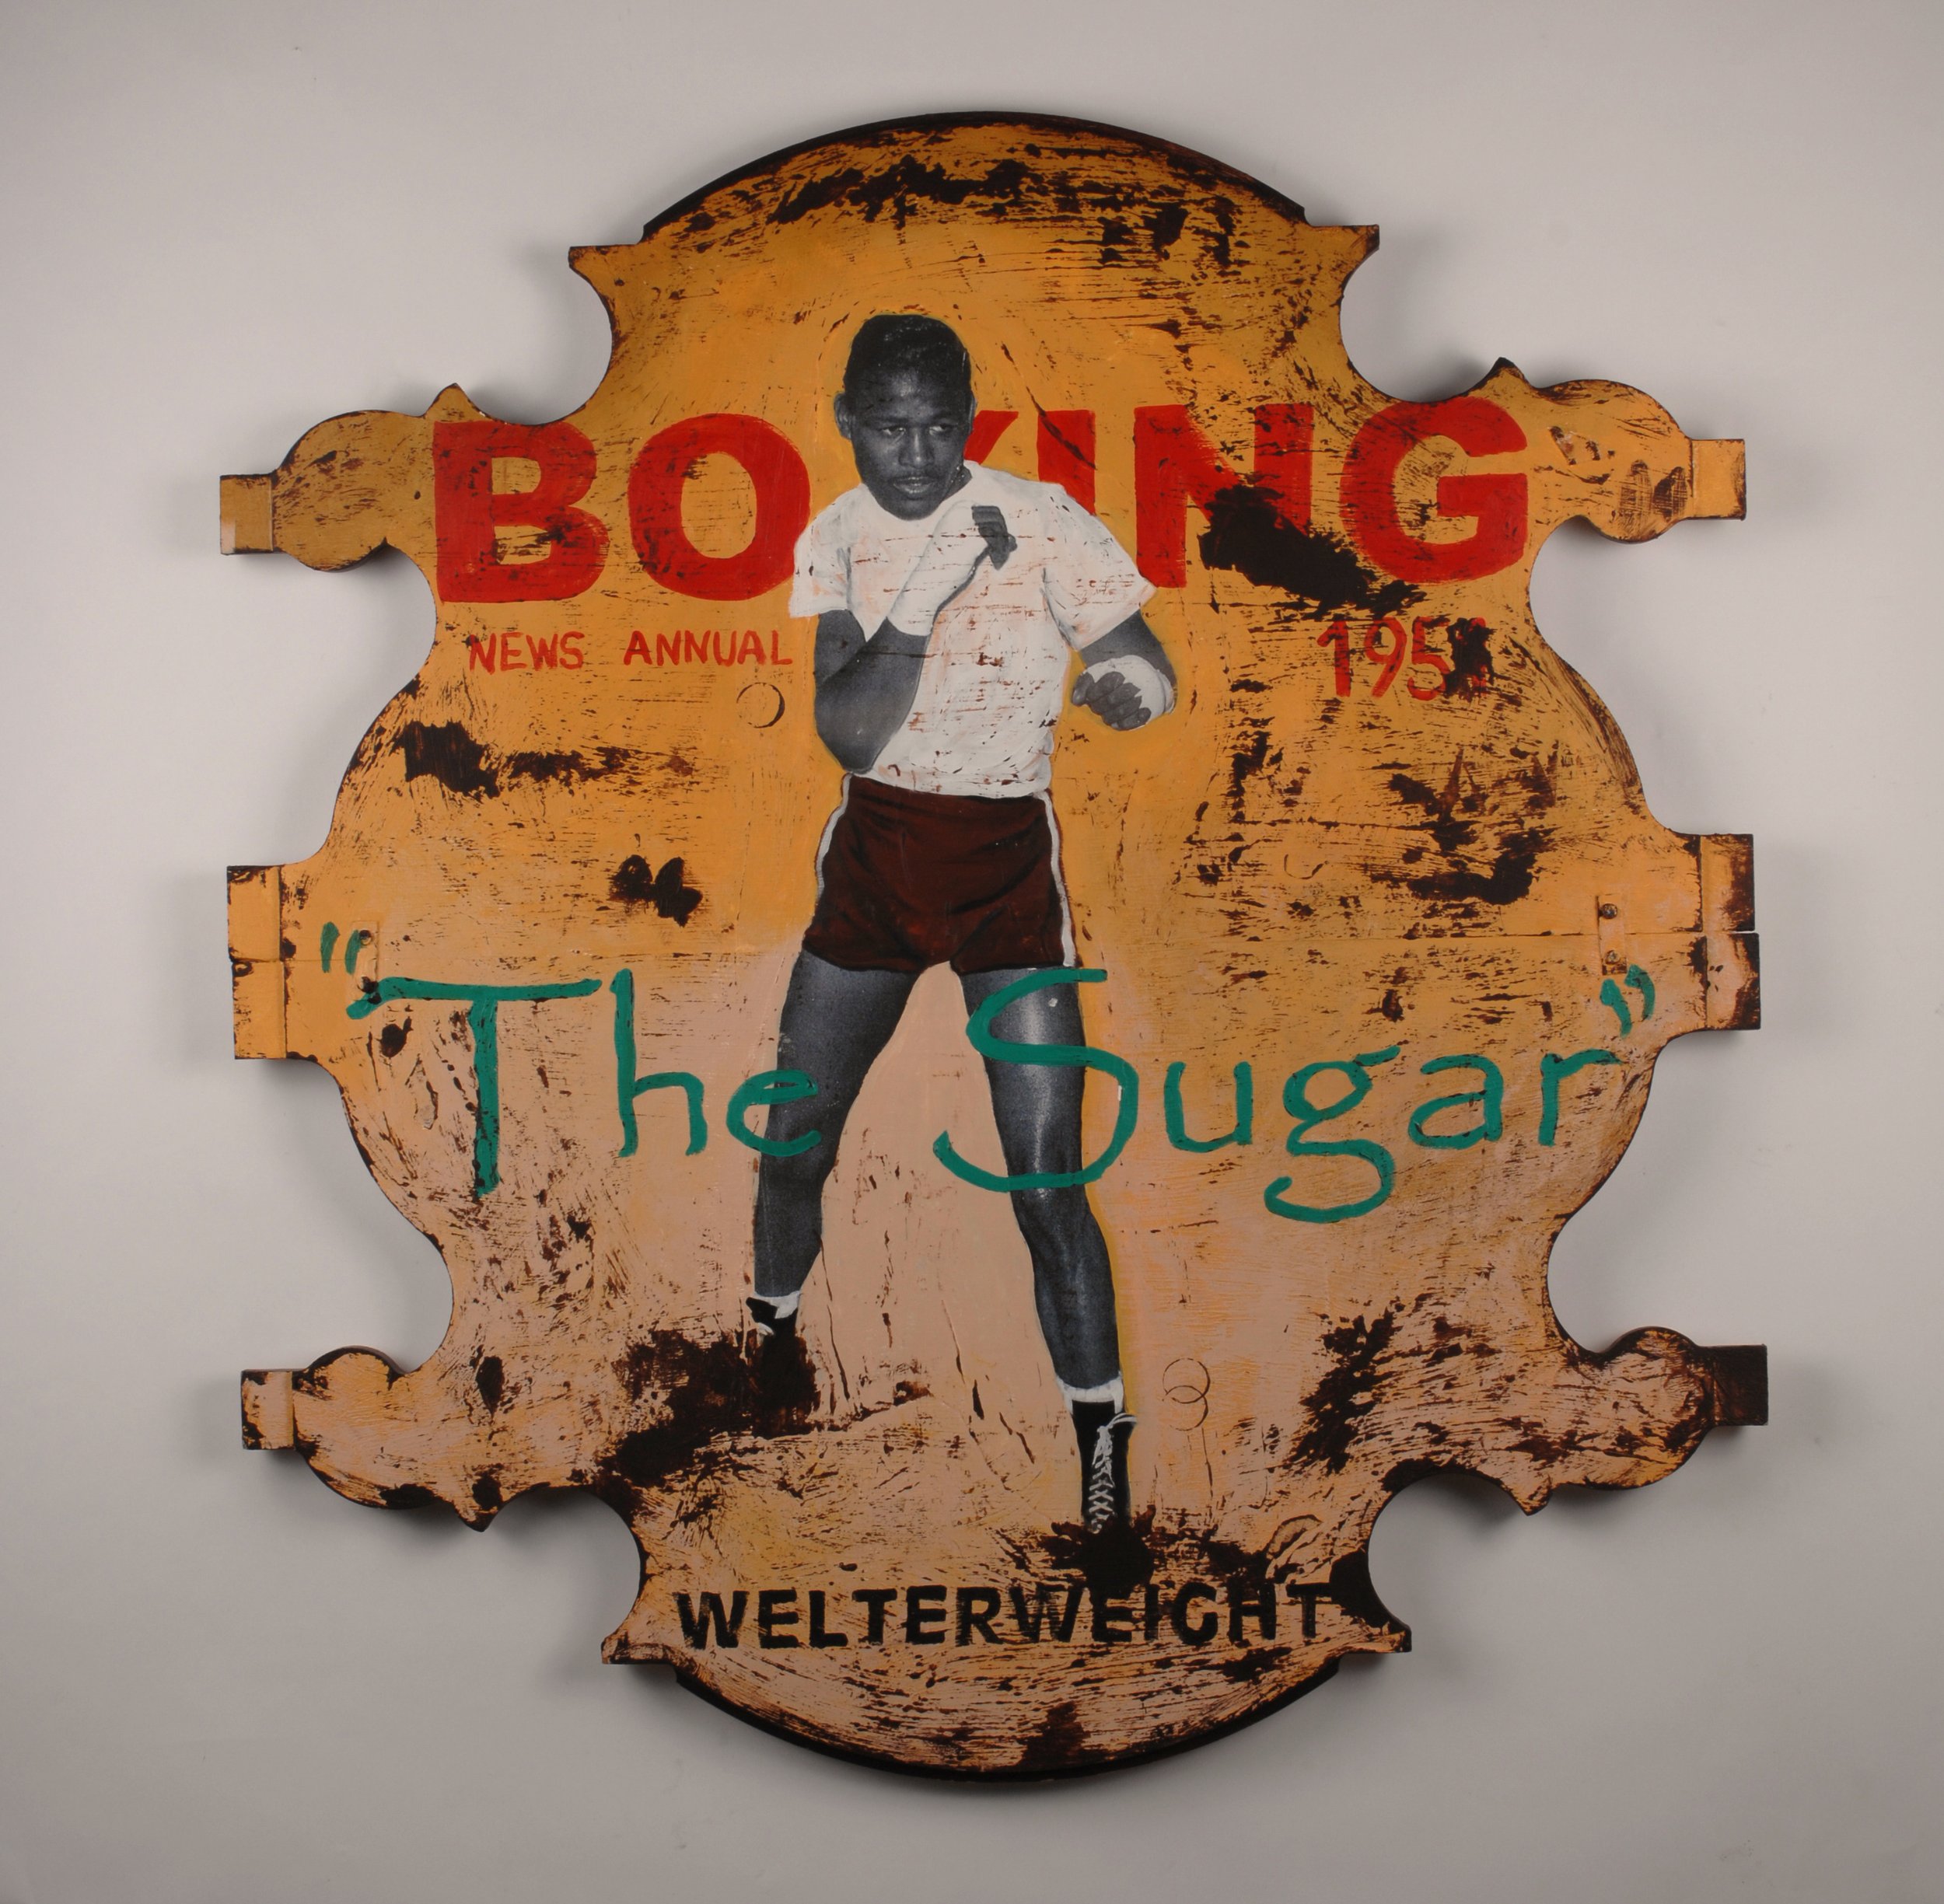  Cedric Smith,  The Sugar , 2004, Mixed Media, The Paul R. Jones Collection of American Art at the University of Alabama 